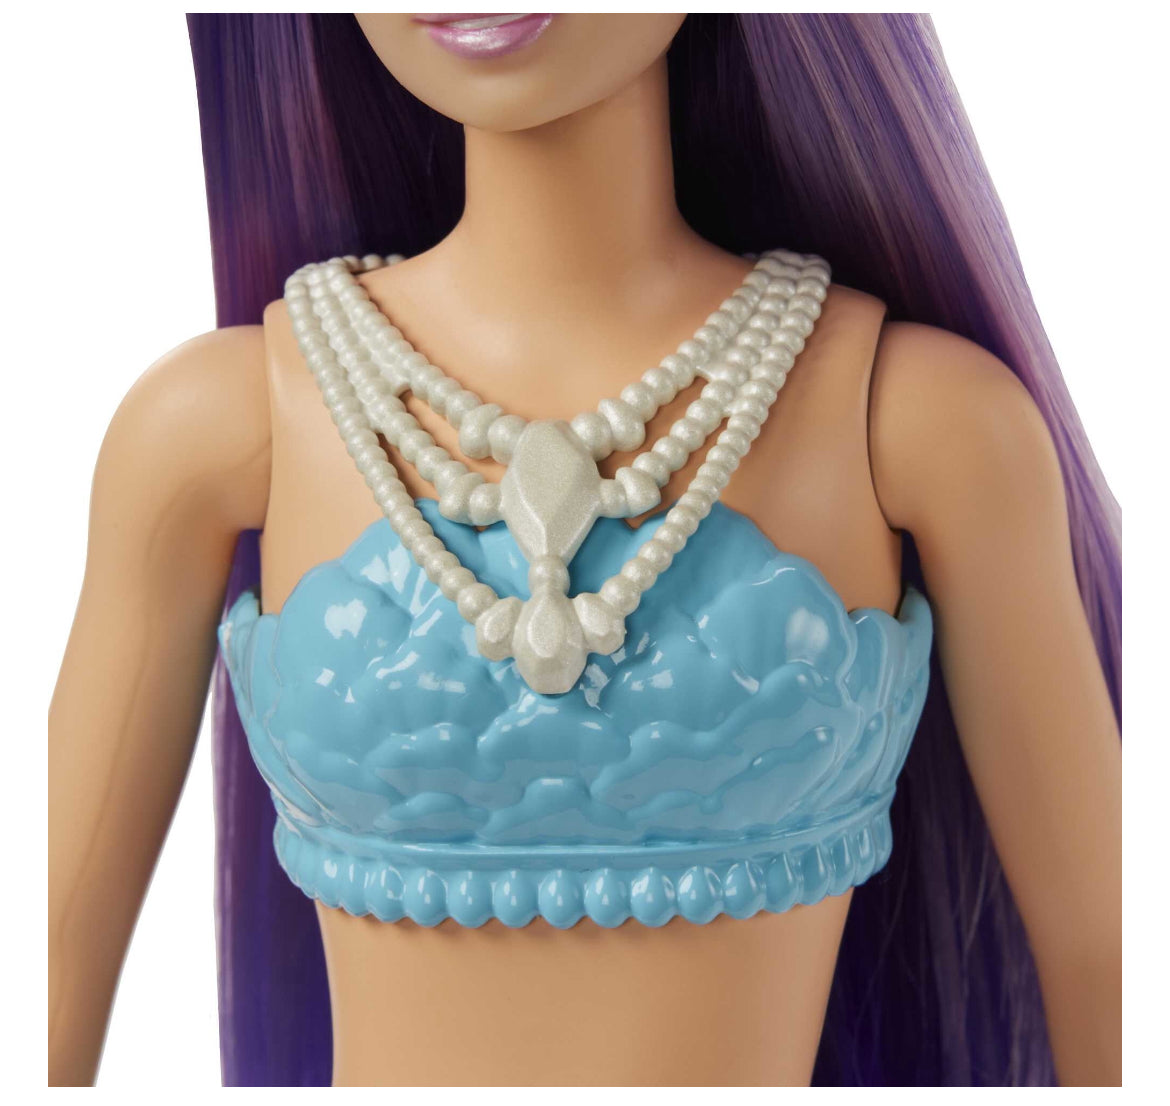 Barbie Dreamtopia Mermaid Doll with Purple Hair, Ombre Tail & Tiara Accessory